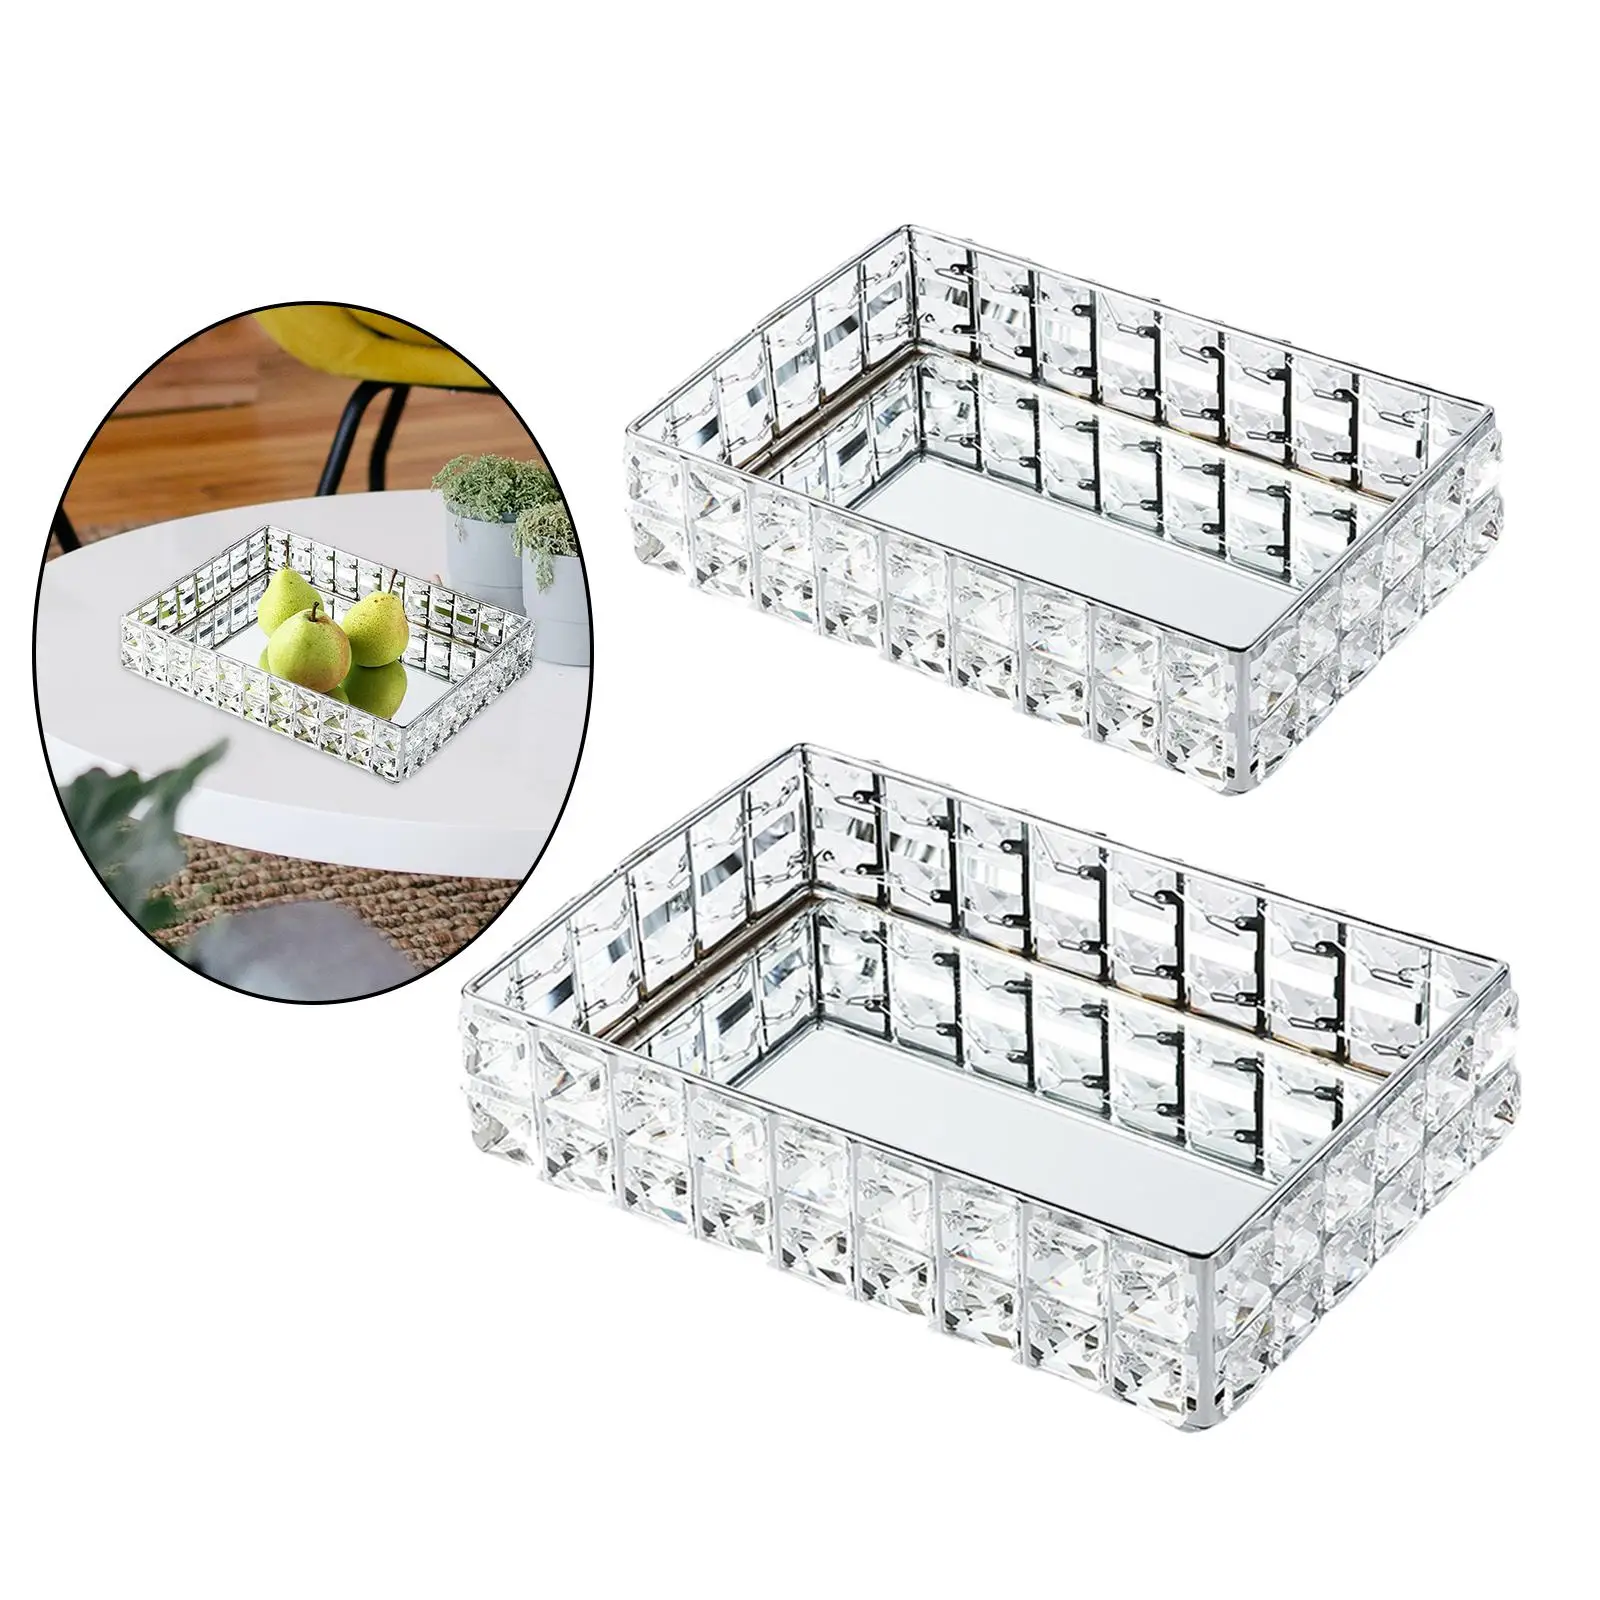 Crystal Mirrored Tray Ornate Wedding Table Centre Candle Plate Chic Gifts